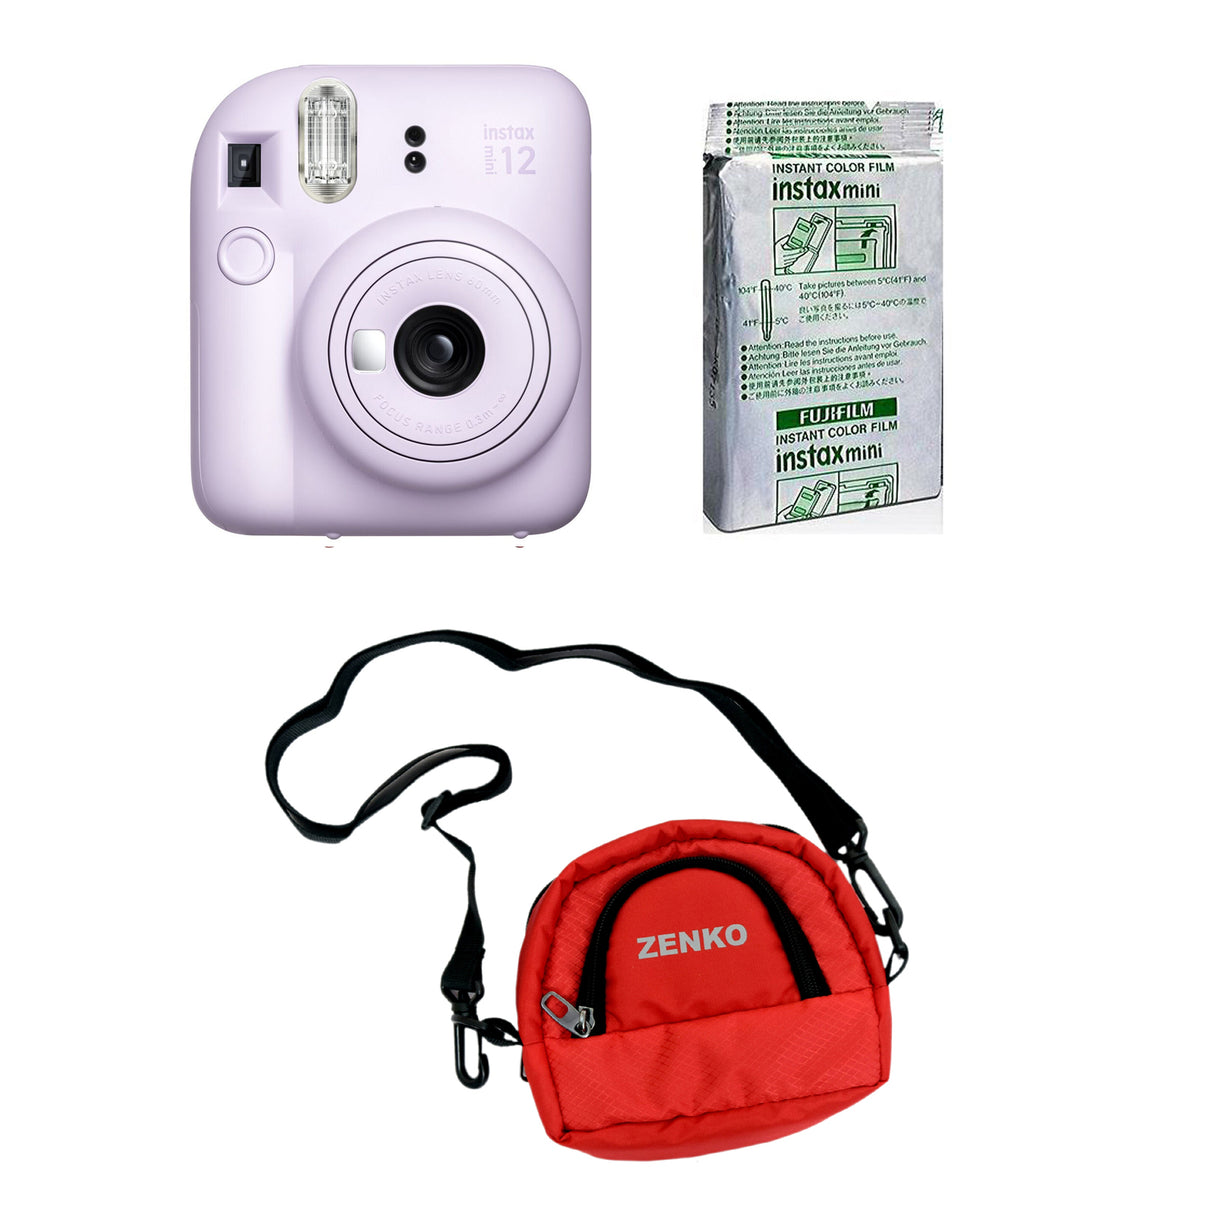 FUJIFILM INSTAX Mini 12 Instant Film Camera with 10X1 Pack of Instant Film With Red Pouch Kit (10 Exposures) Lilac Purple